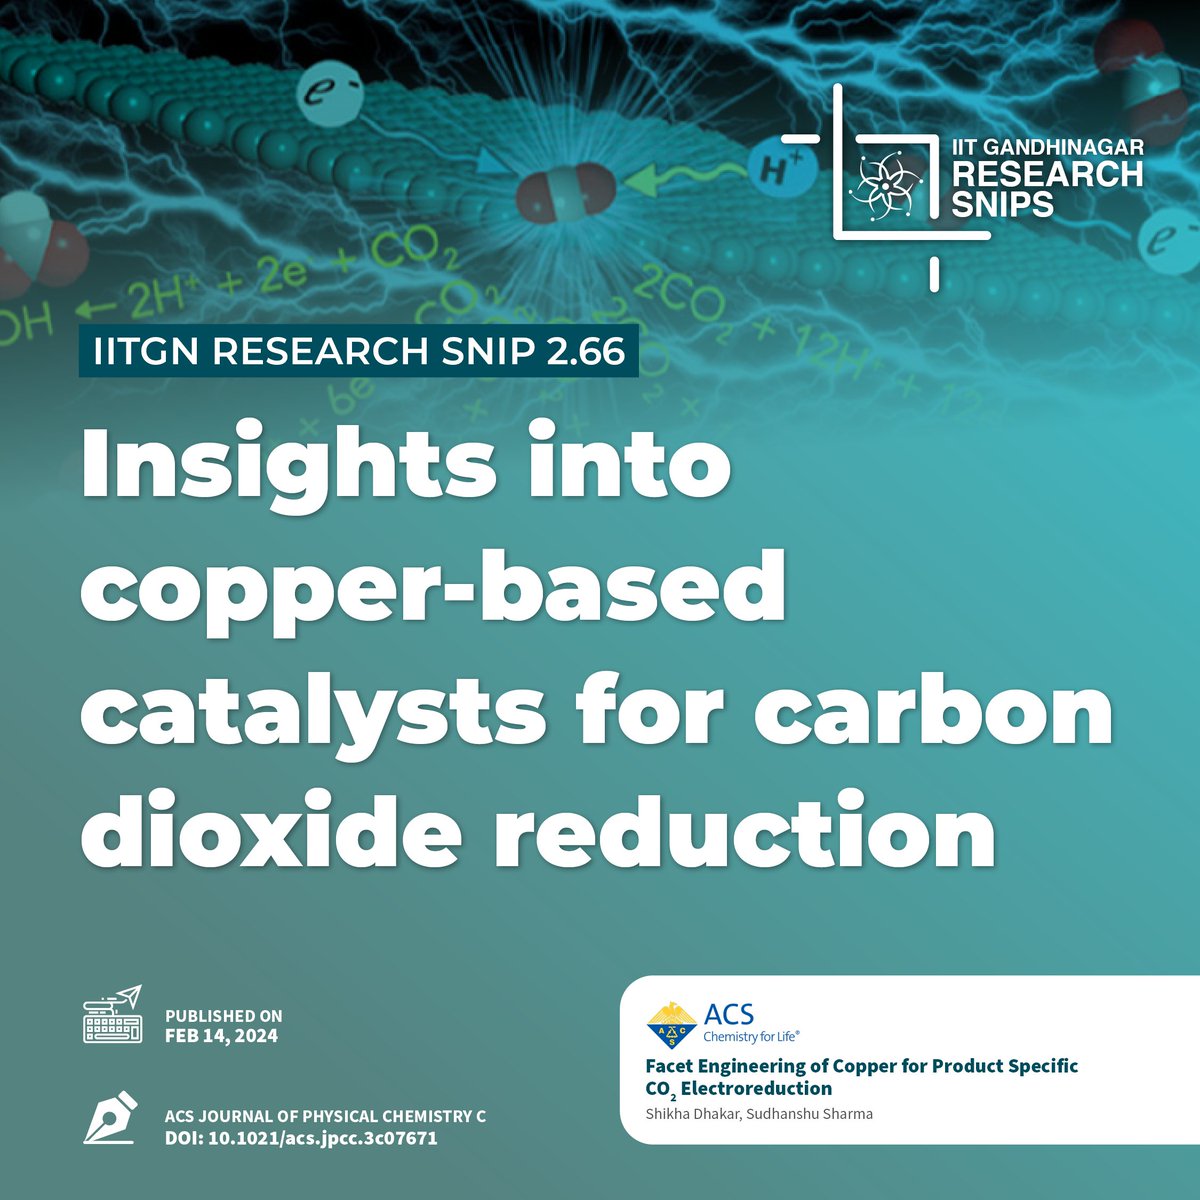 #IITGNResearchSnip 2.66: This review explores the use of copper-based #catalysts for #electroreduction of carbon dioxide (#CO2), which is crucial for #GreenhouseGas mitigation. #Copper (Cu) is favoured for its abundance and effectiveness in CO2 electroreduction (CO2ER).